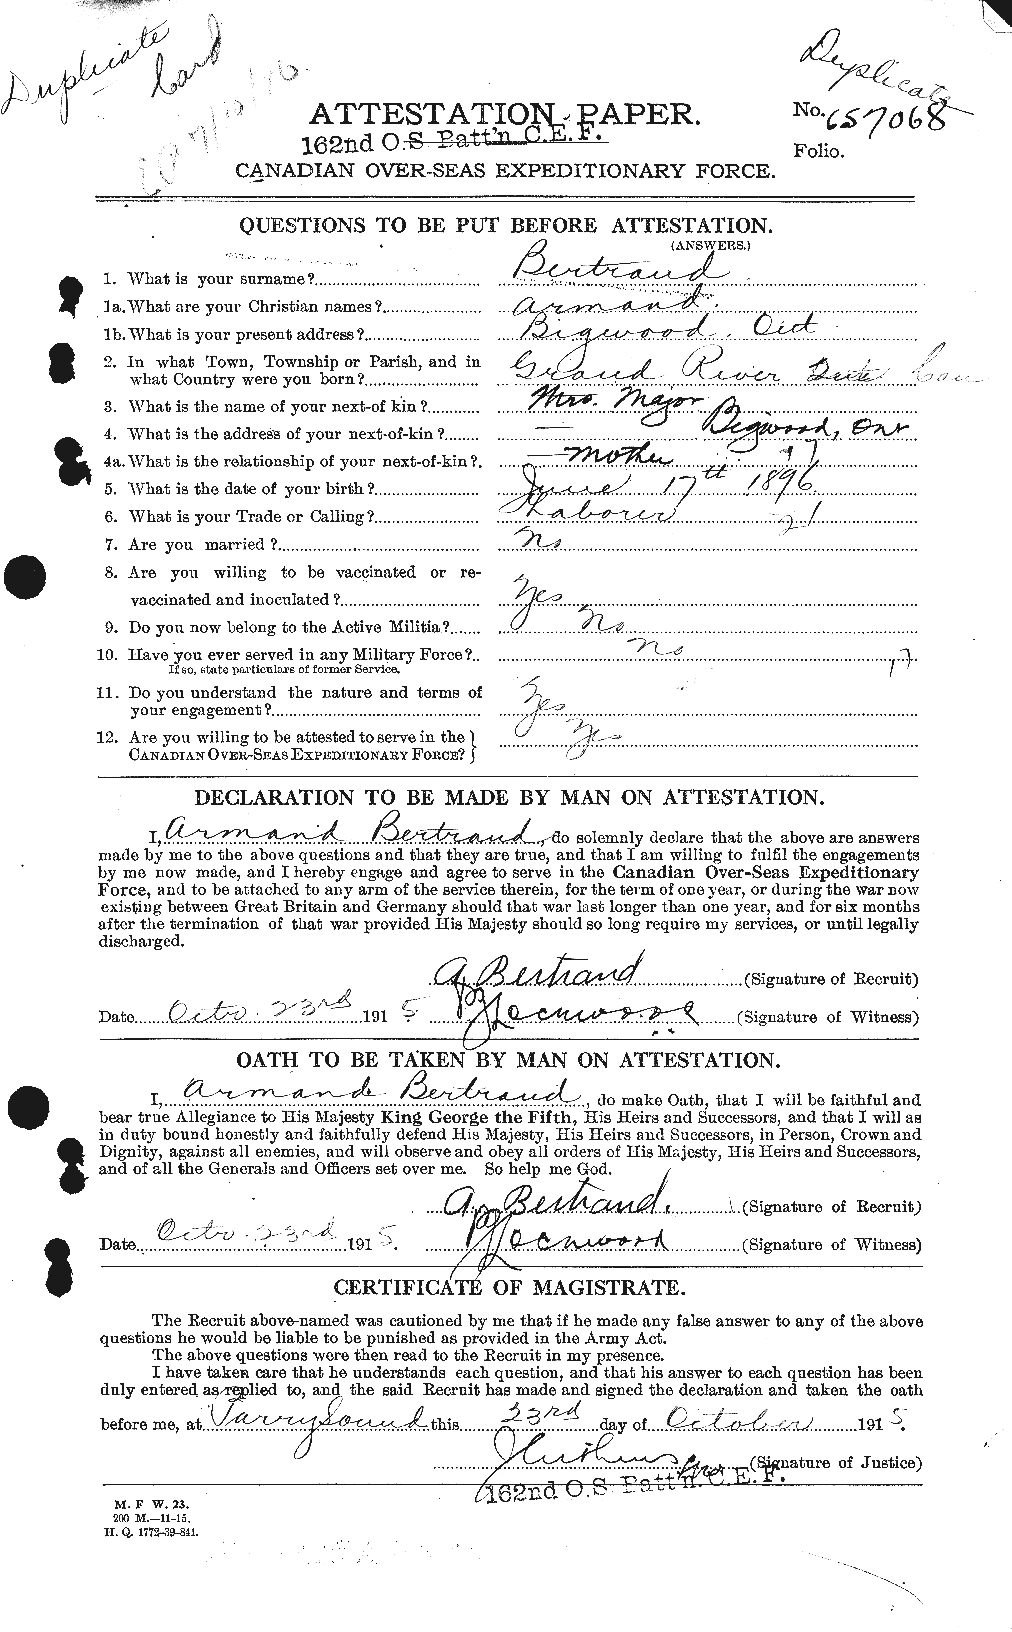 Personnel Records of the First World War - CEF 238726a